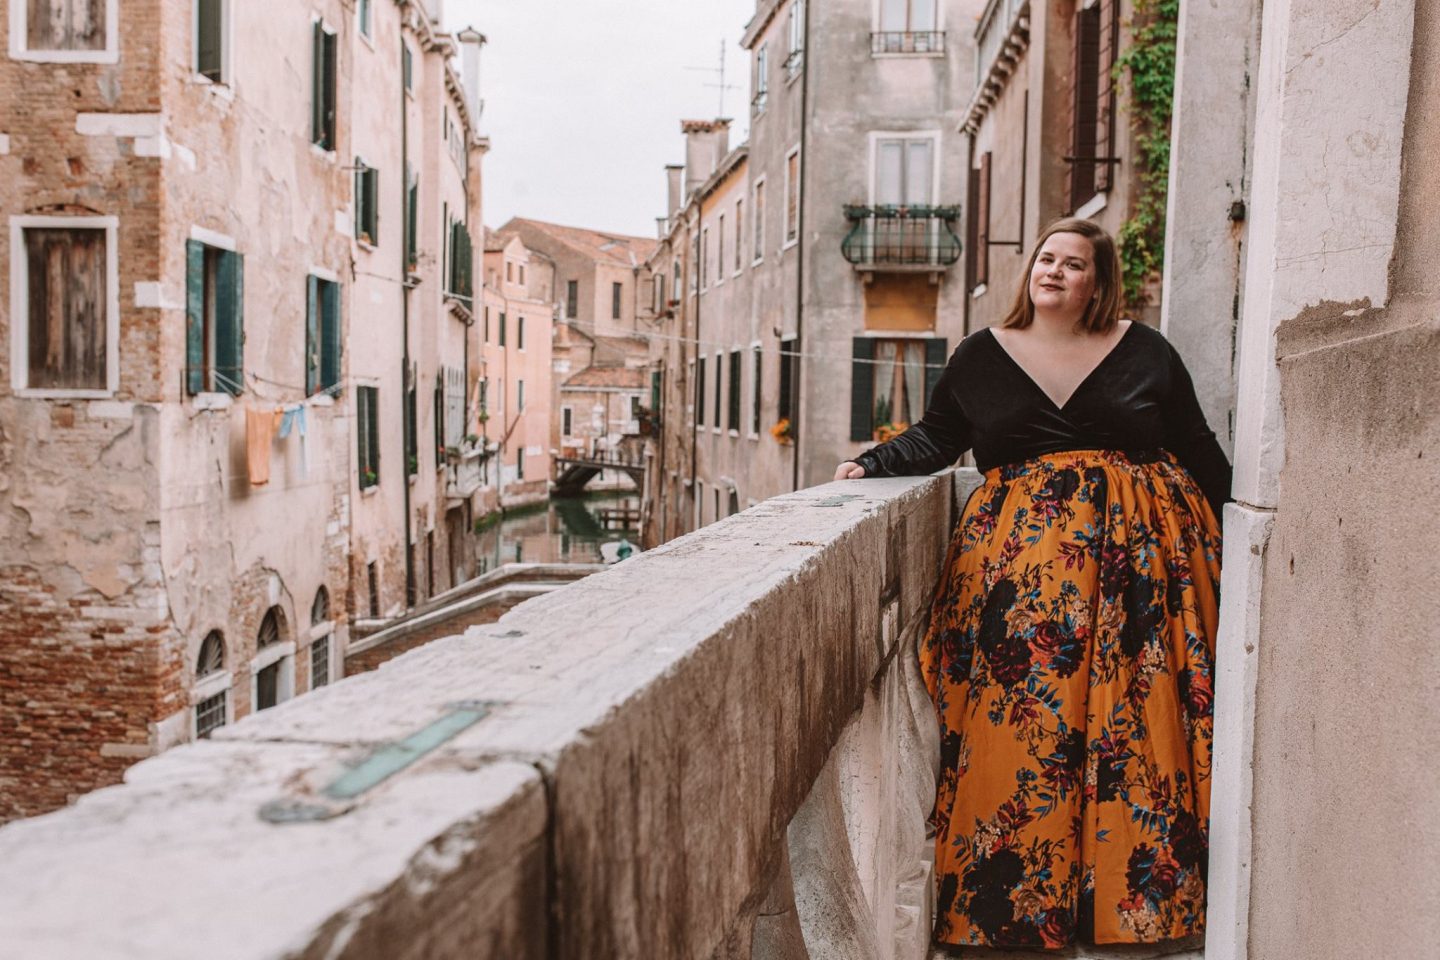 How to get incredible photos of yourself while traveling in Venice, Italy